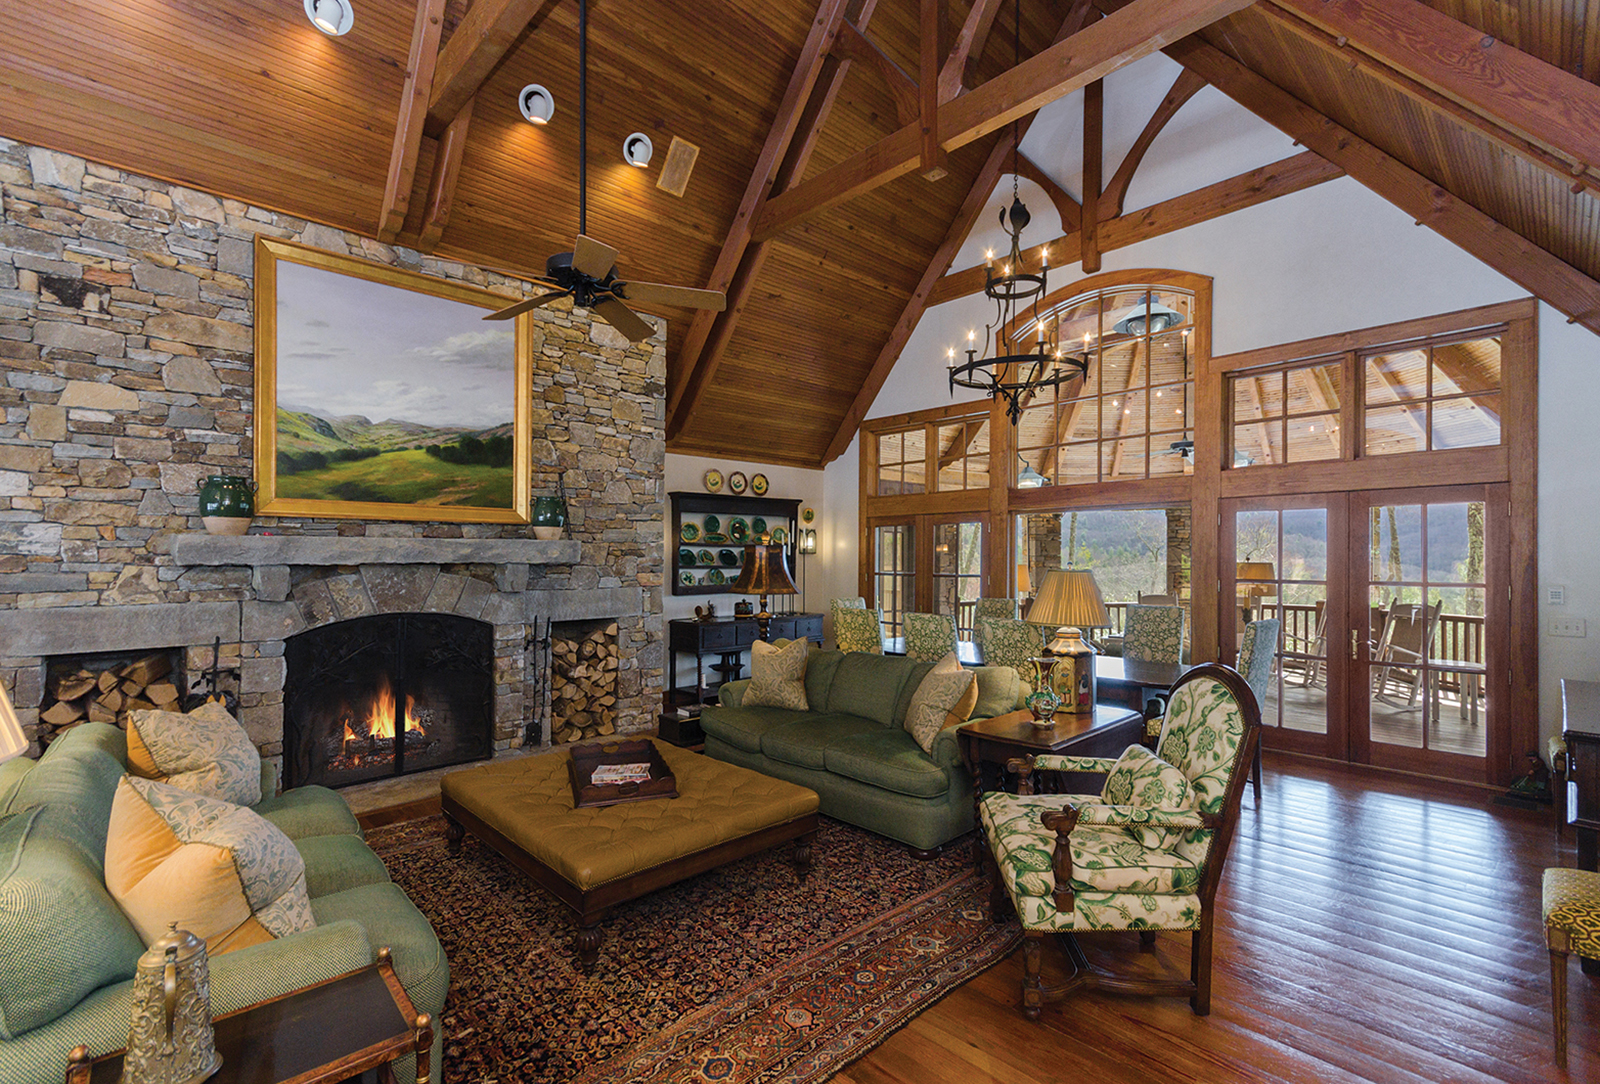 Home for sale in Cashiers NC - Fireplace room